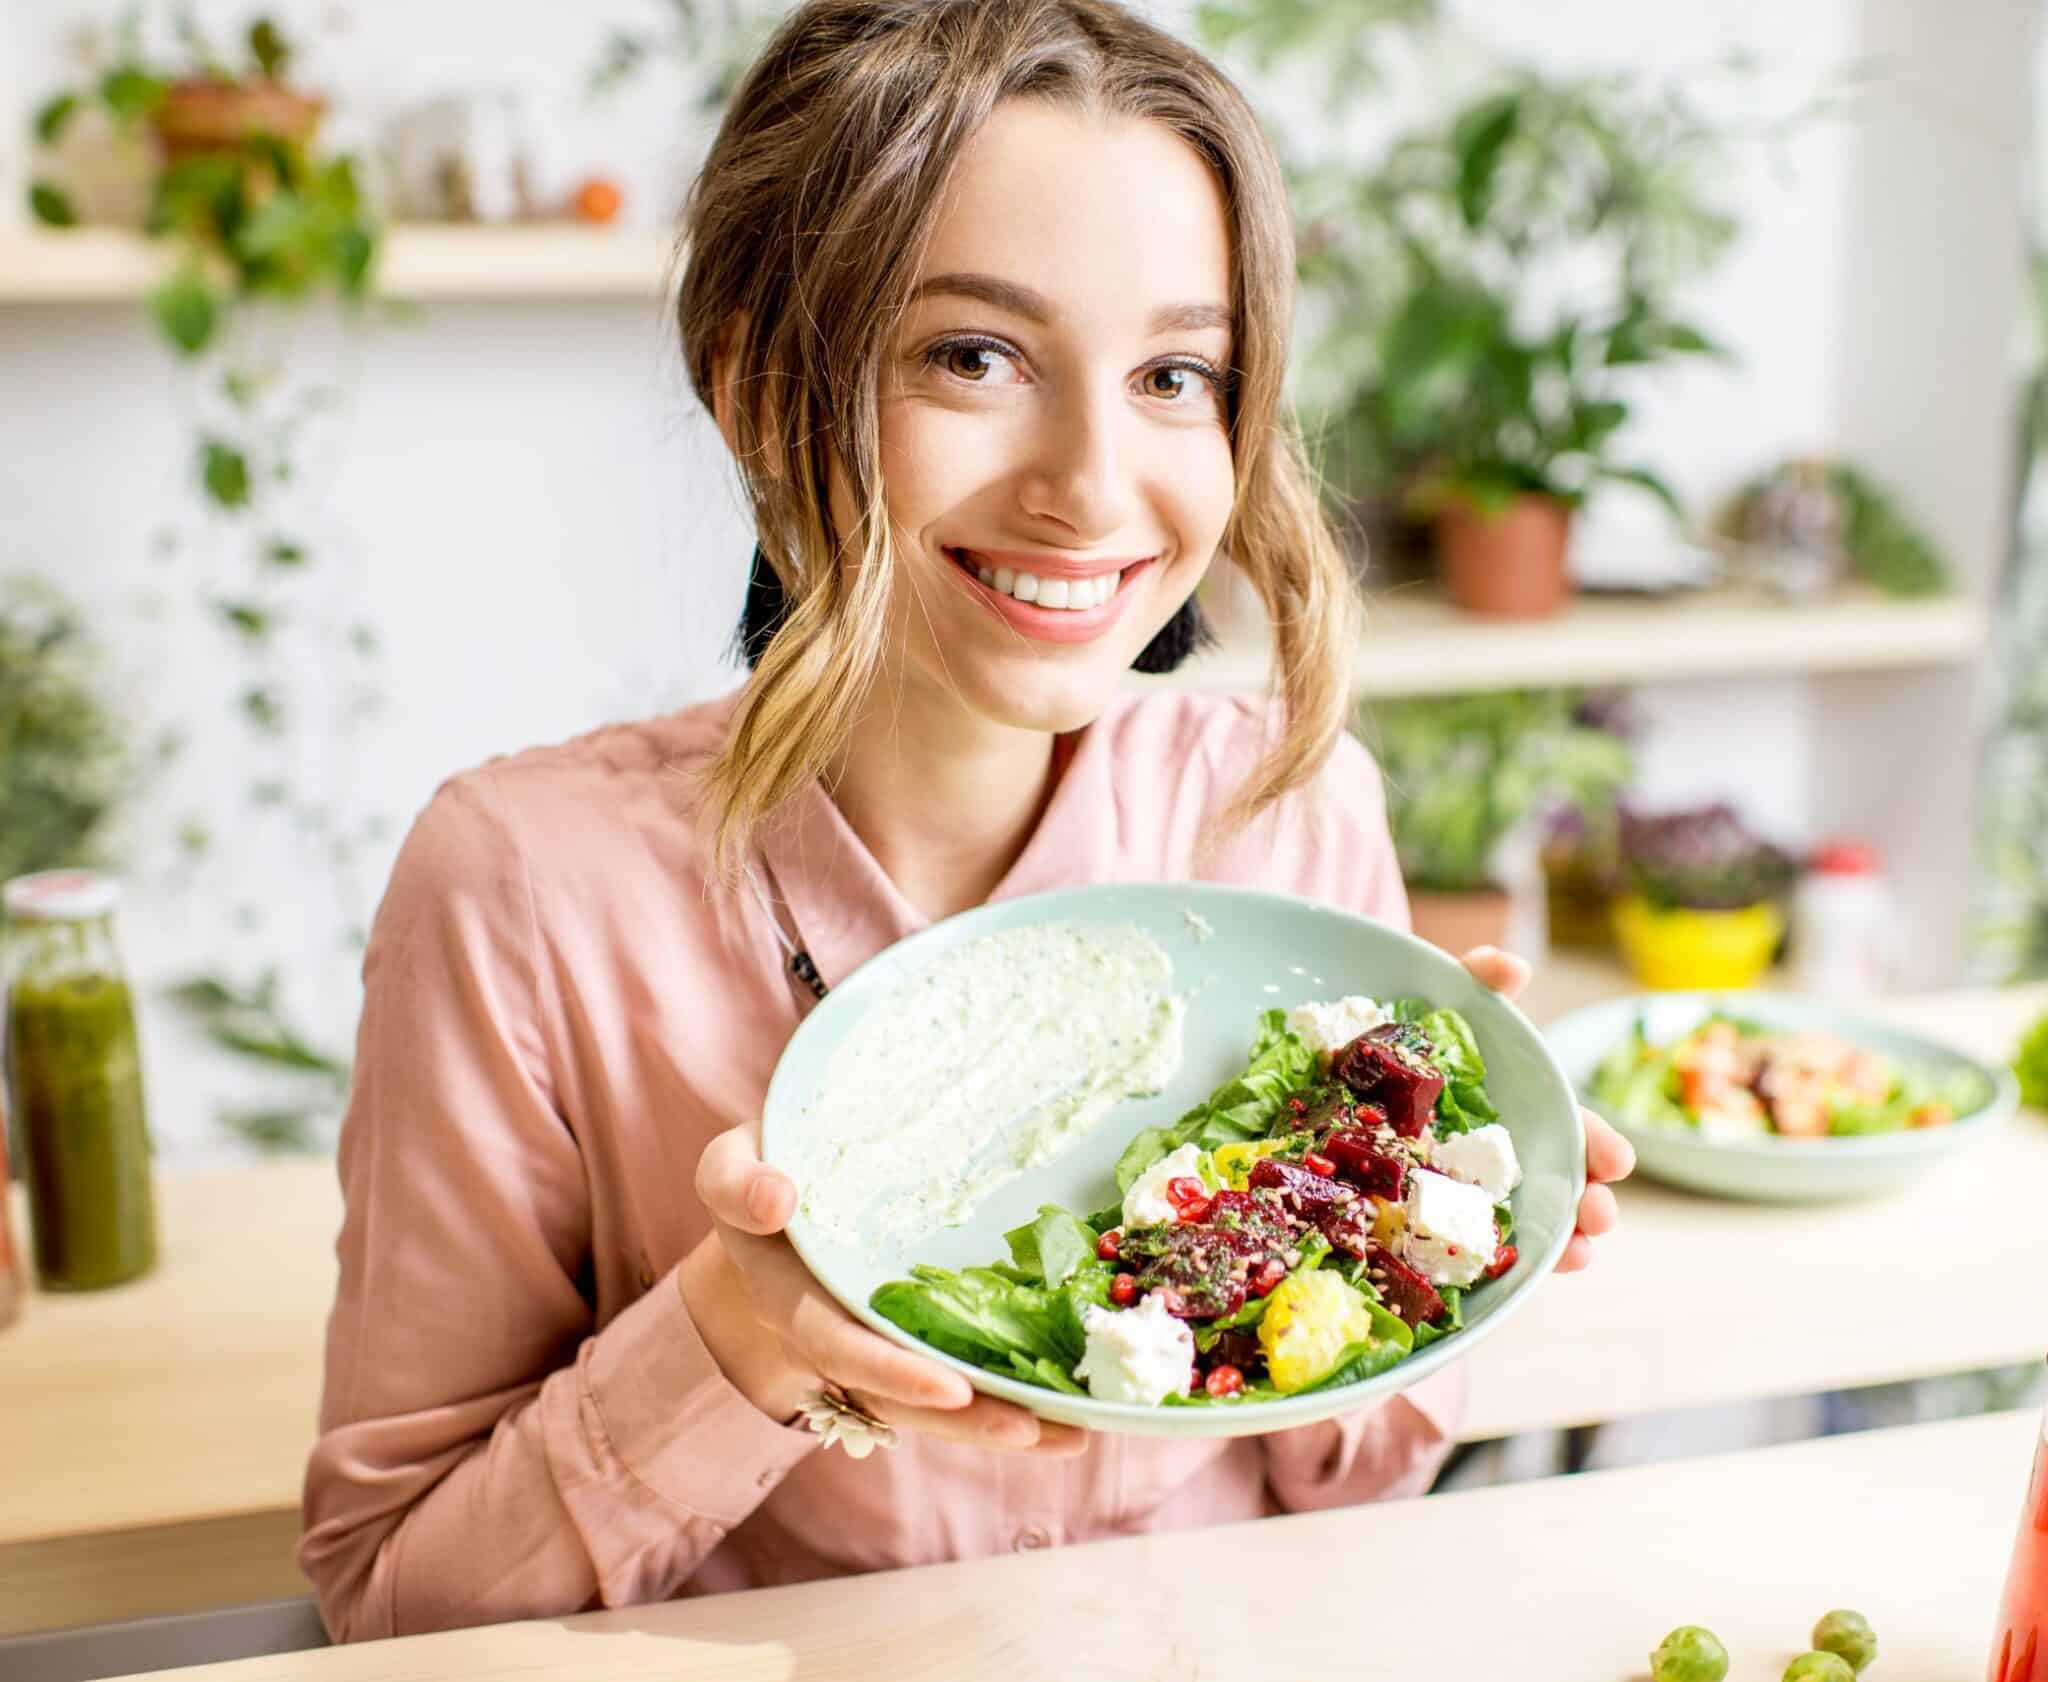 Portrait of a young woman holding a plate of salad sitting indoors surrounded with green flowers and healthy vegan food